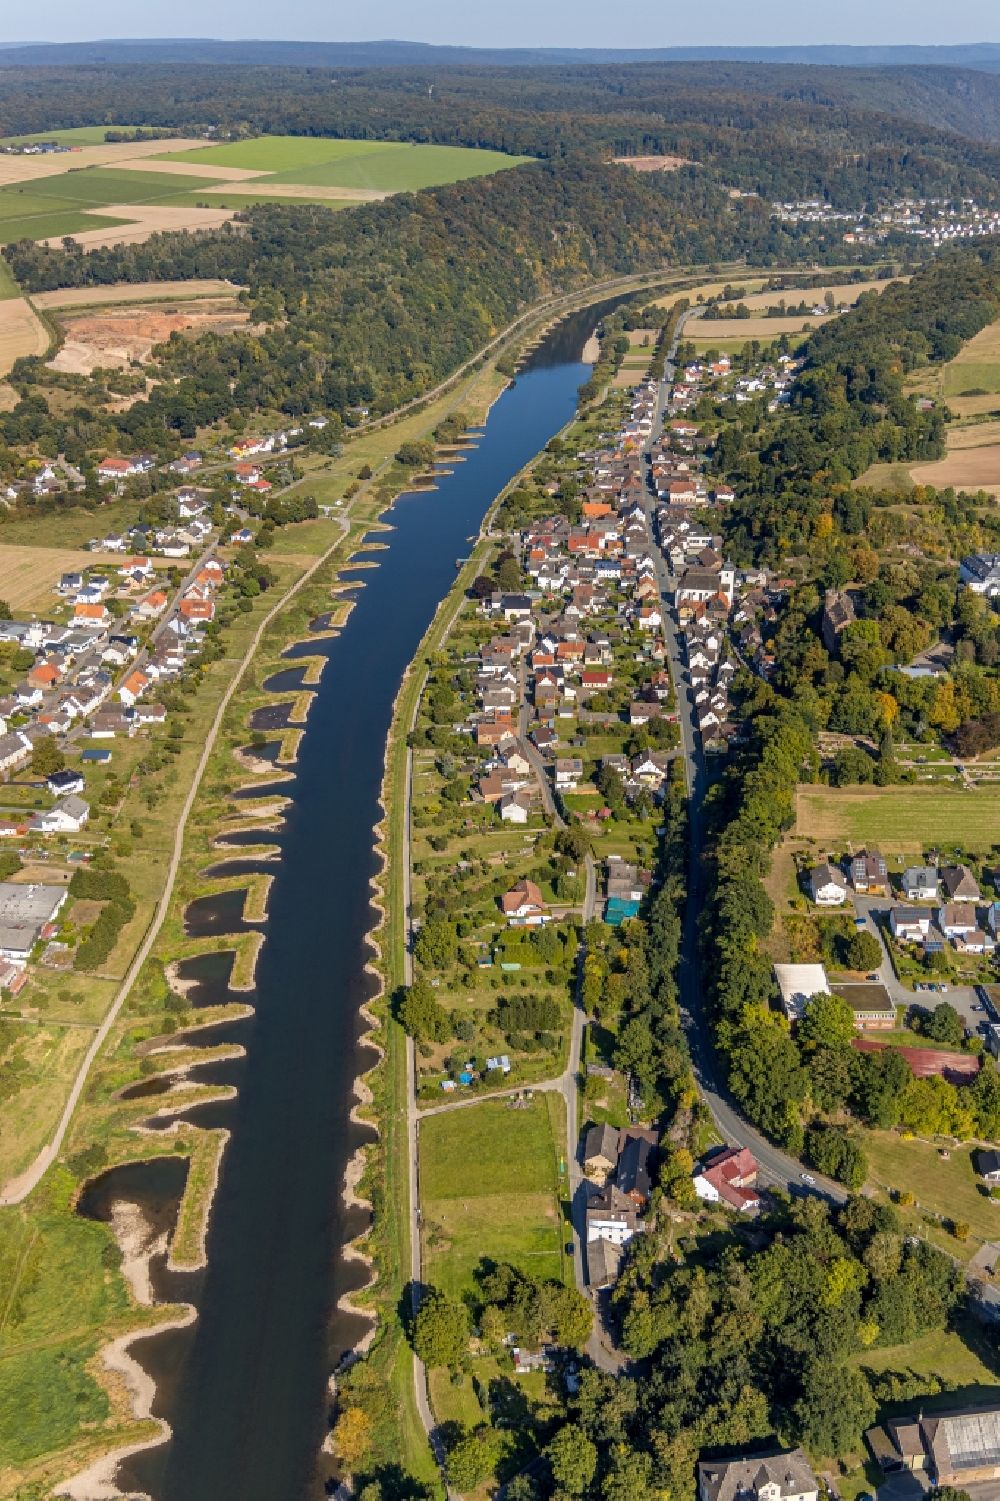 Herstelle from the bird's eye view: Village on the banks of the area Weser - river course in Herstelle in the state North Rhine-Westphalia, Germany